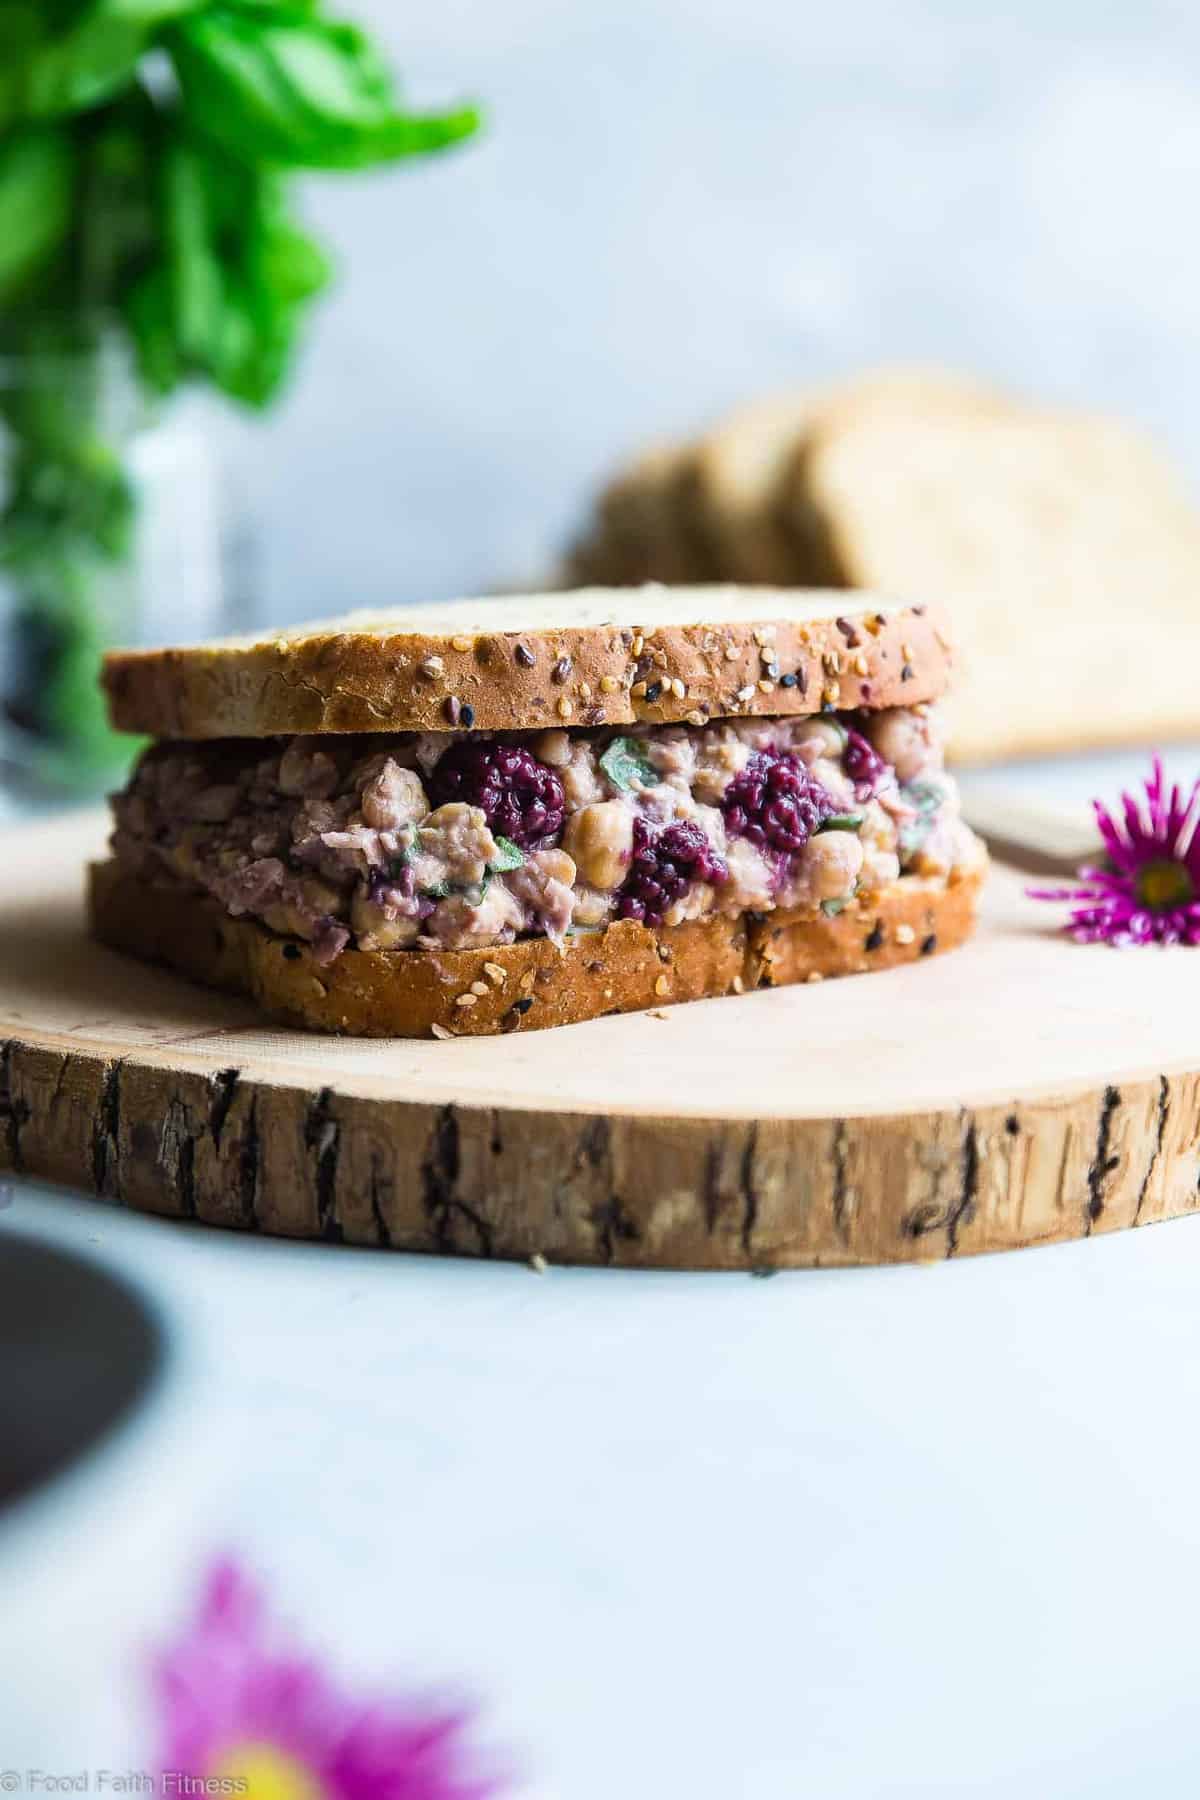 Blackberry Balsamic Vegan Chickpea Salad Sandwich - This simple sandwich has tangy notes of balsamic vinegar, sweet blackberries and fresh basil! It's a healthy, dairy and gluten free lunch that's packed with plant protein and fiber to keep you FULL! | #Foodfaithfitness | #Glutenfree #Vegan #Healthy #MealPrep #Dairyfree